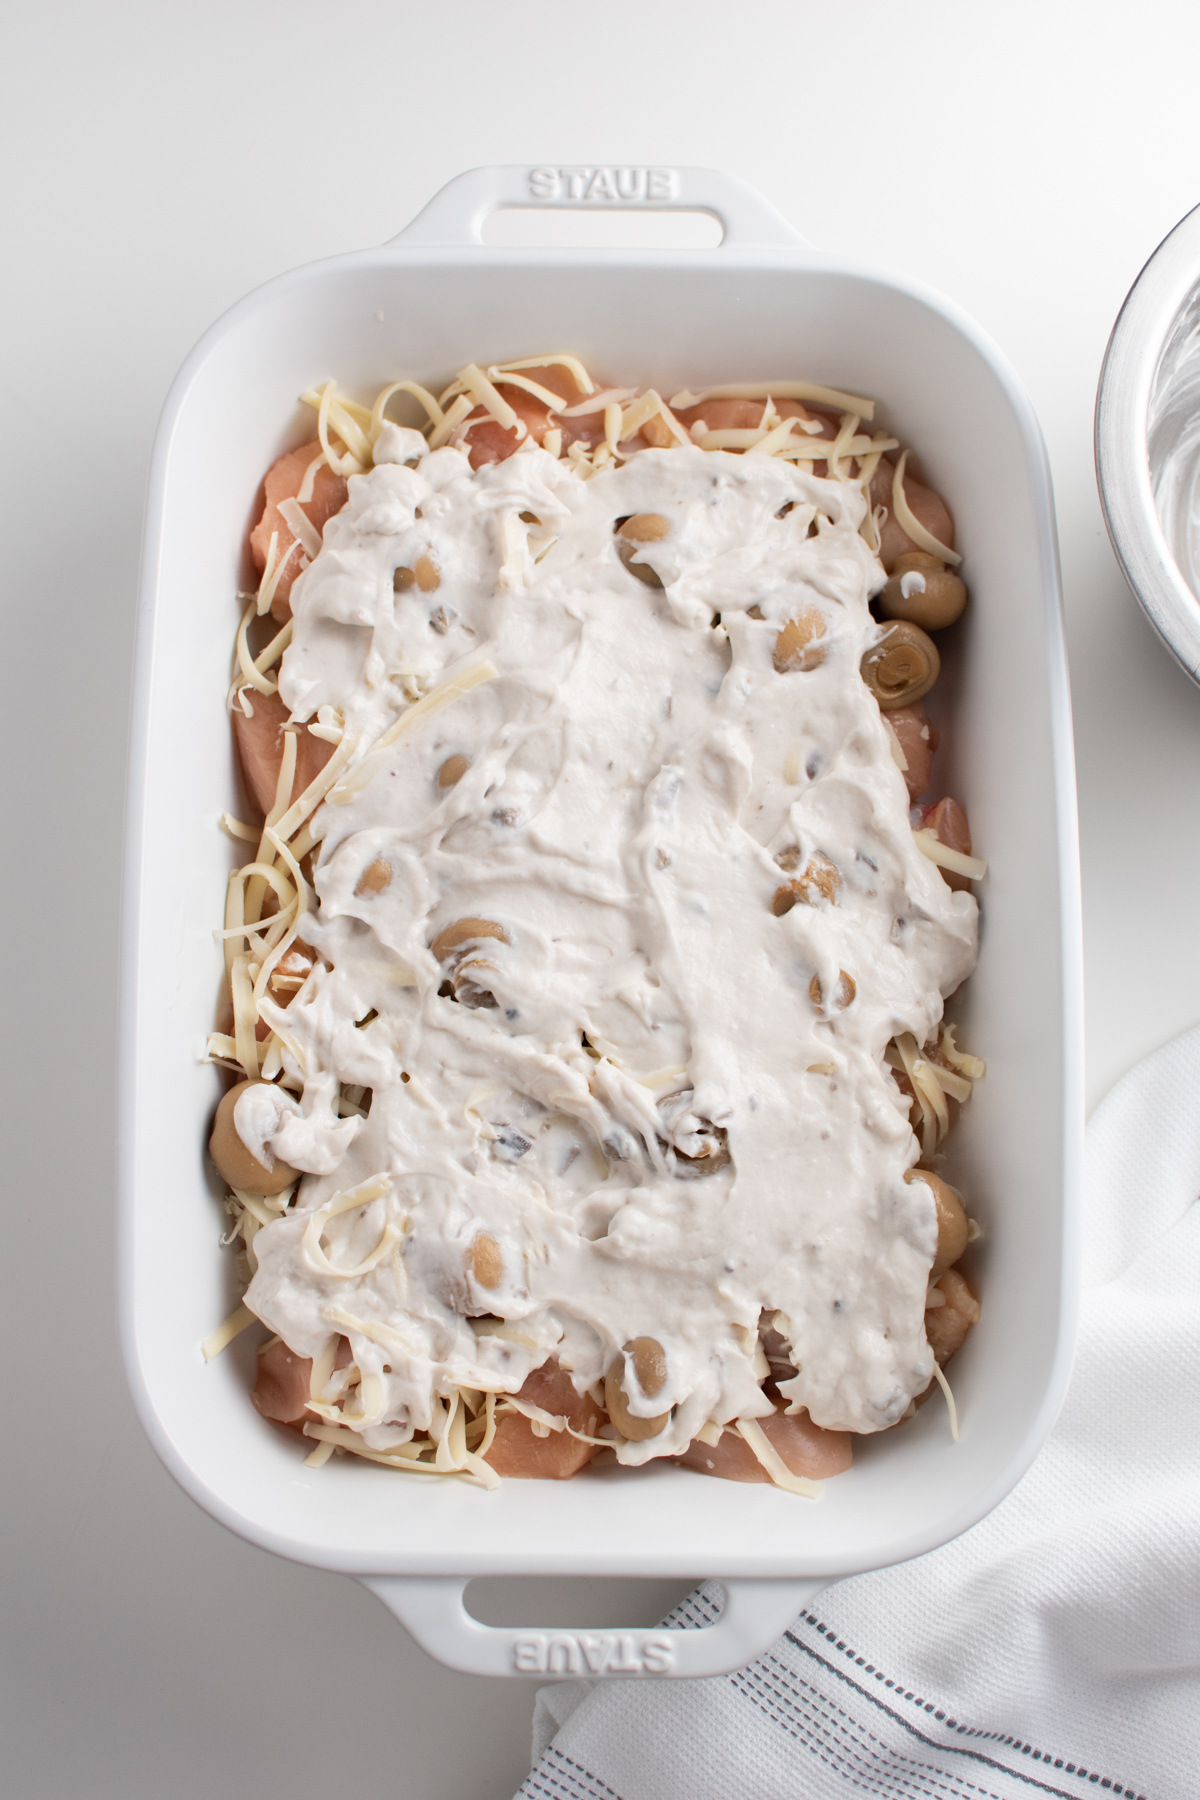 Creamy swiss chicken bake in white dish before being put in the oven.